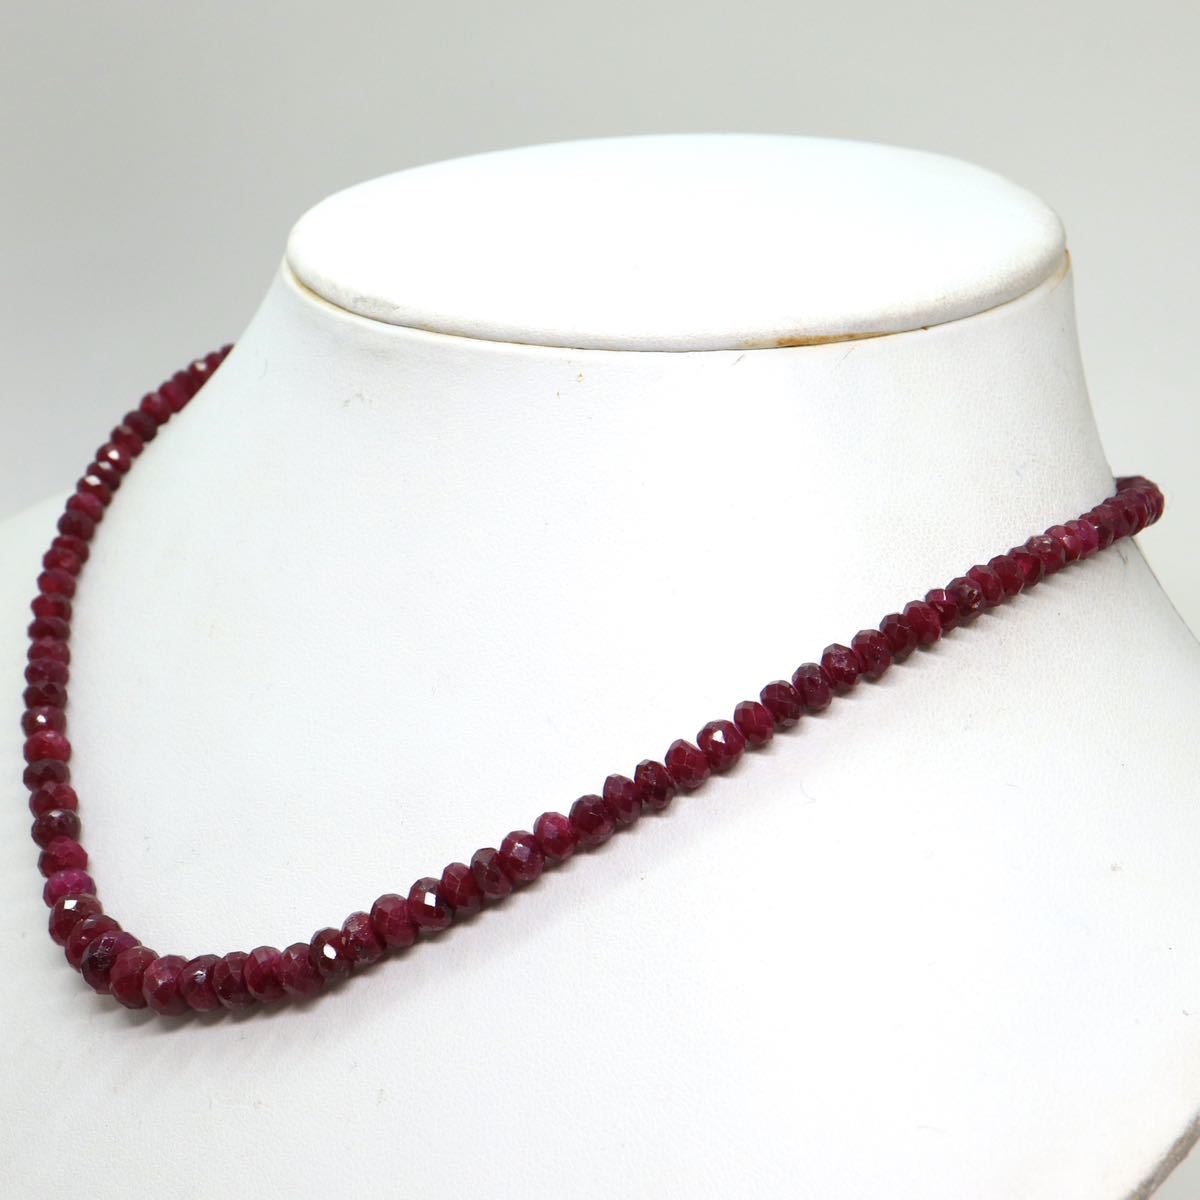 《K14天然ルビーネックレス》J ◎18.0g 5 39.5cm ruby necklaceジュエリー jewelry EA0/EA0_画像3